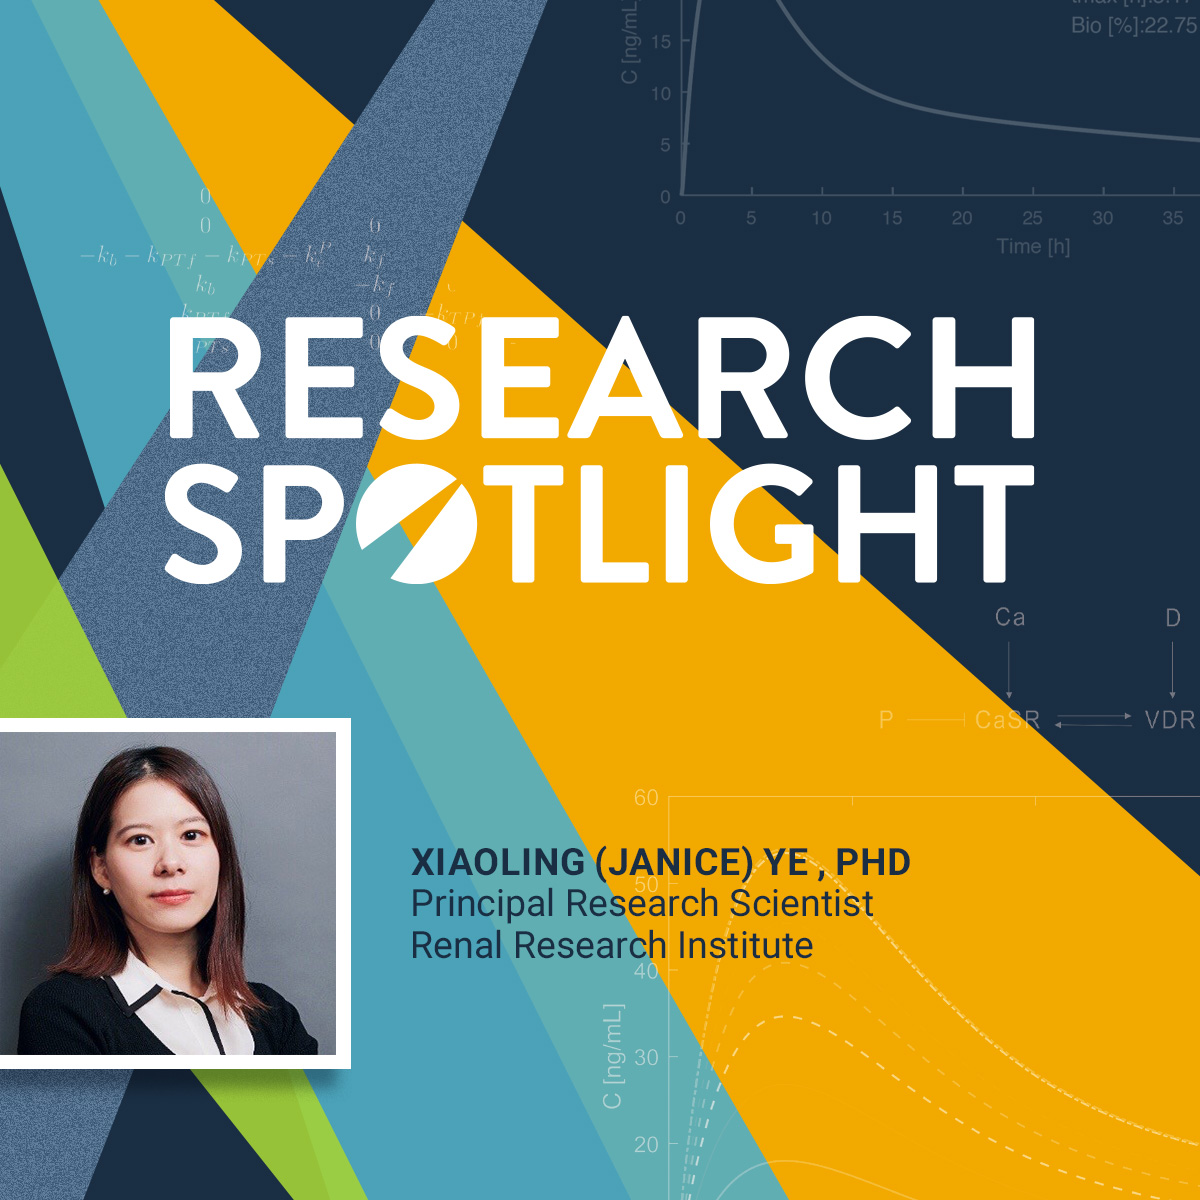 In this installment of #RRI's #ResearchSpotlight, we feature Dr. Janice Ye's latest research published in #Kidney360 about the variability of serum phosphate in #hemodialysis patients & its association with all-cause mortality. Read the article @ bit.ly/spotlight_JY_2…